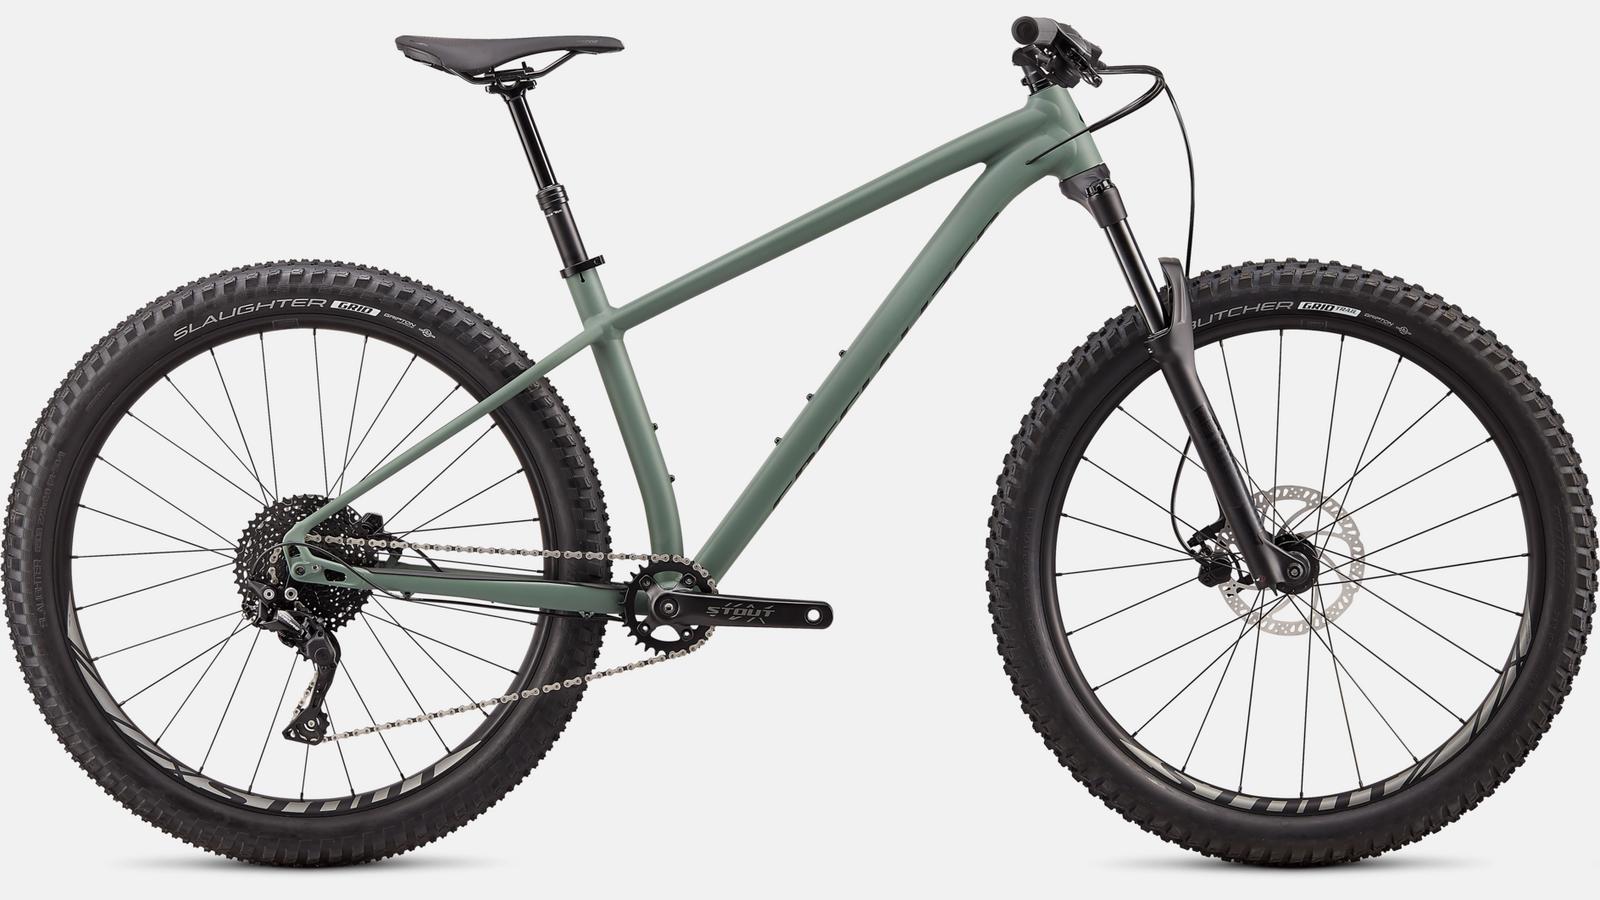 Touch-up paint for 2020 Specialized Fuse 27.5 - Satin Sage Green